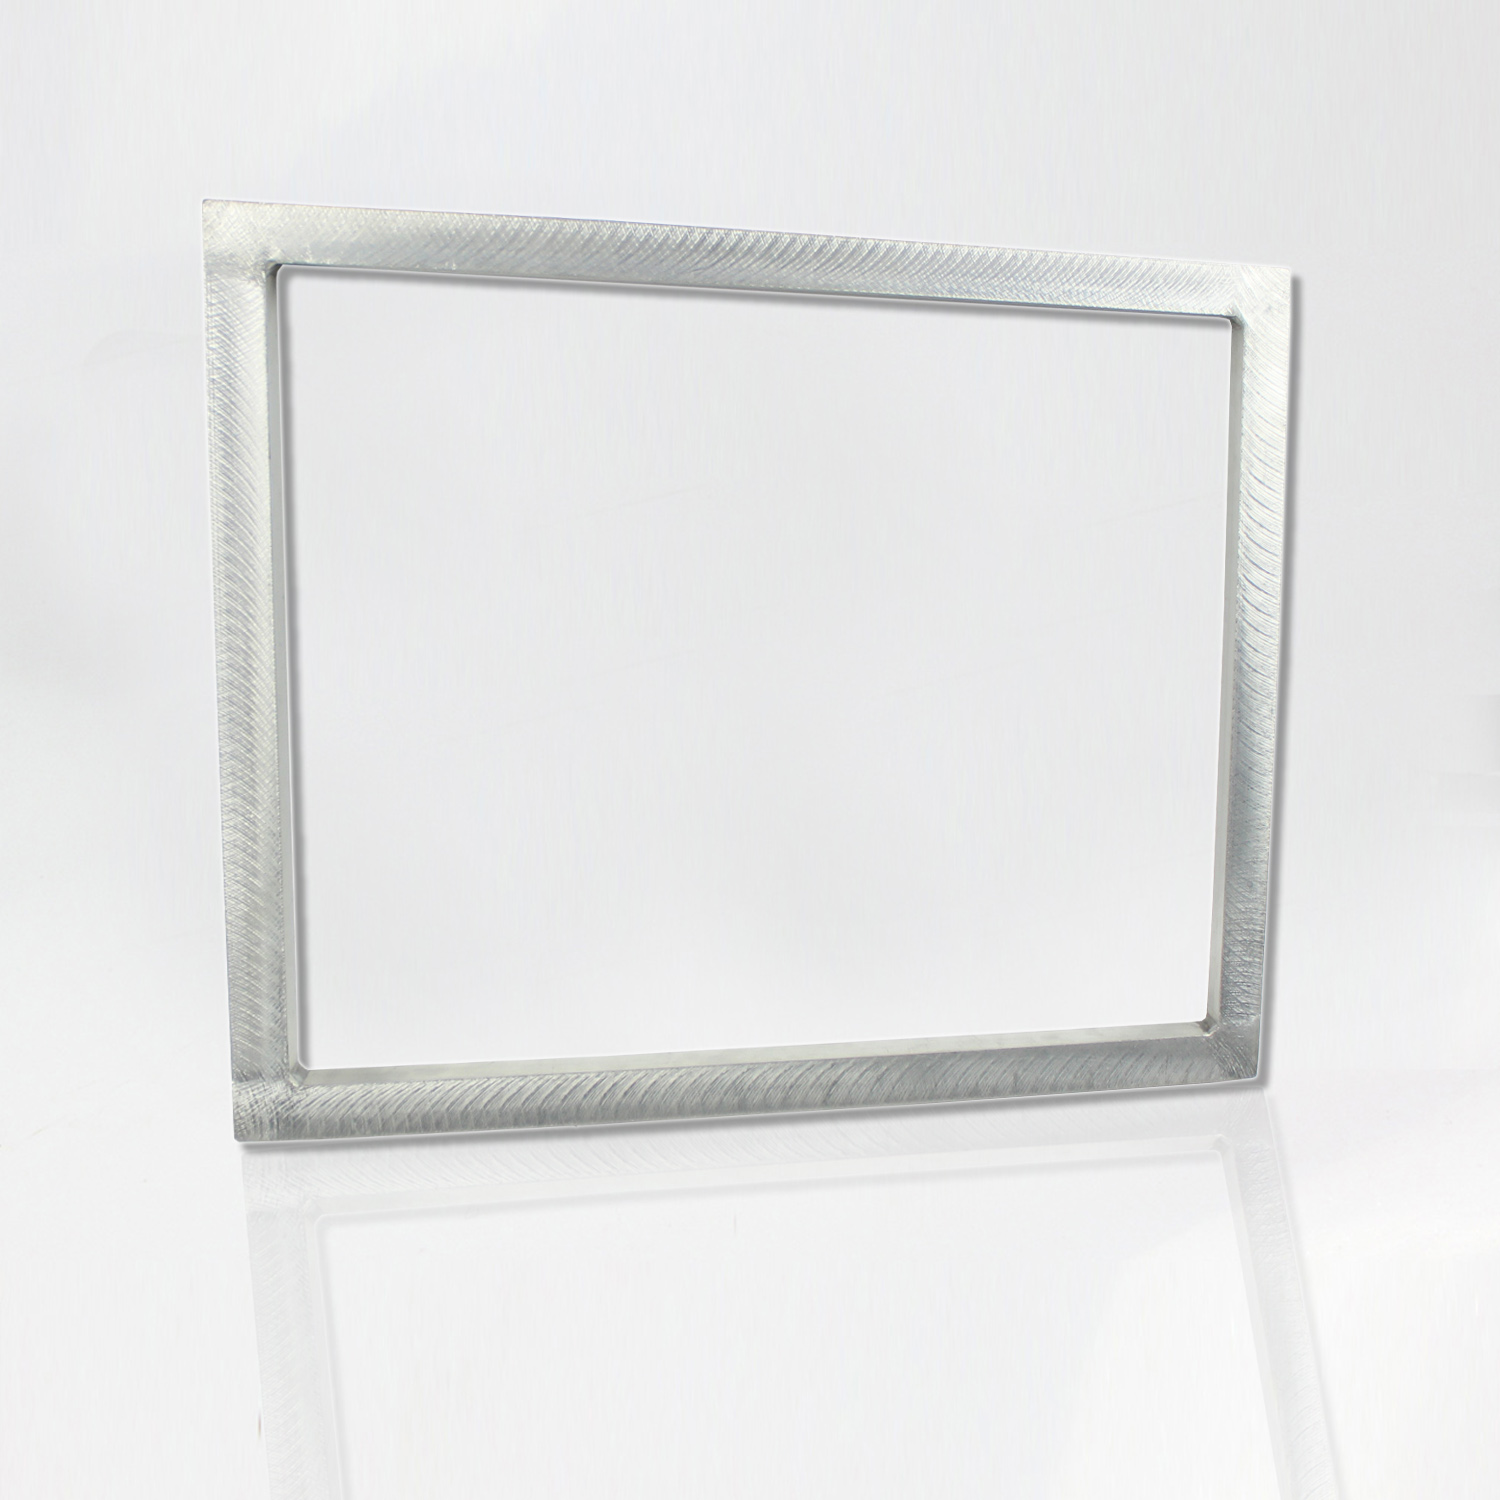 Aluminum Frame 23″ x 31″ (frame only) Featured Image